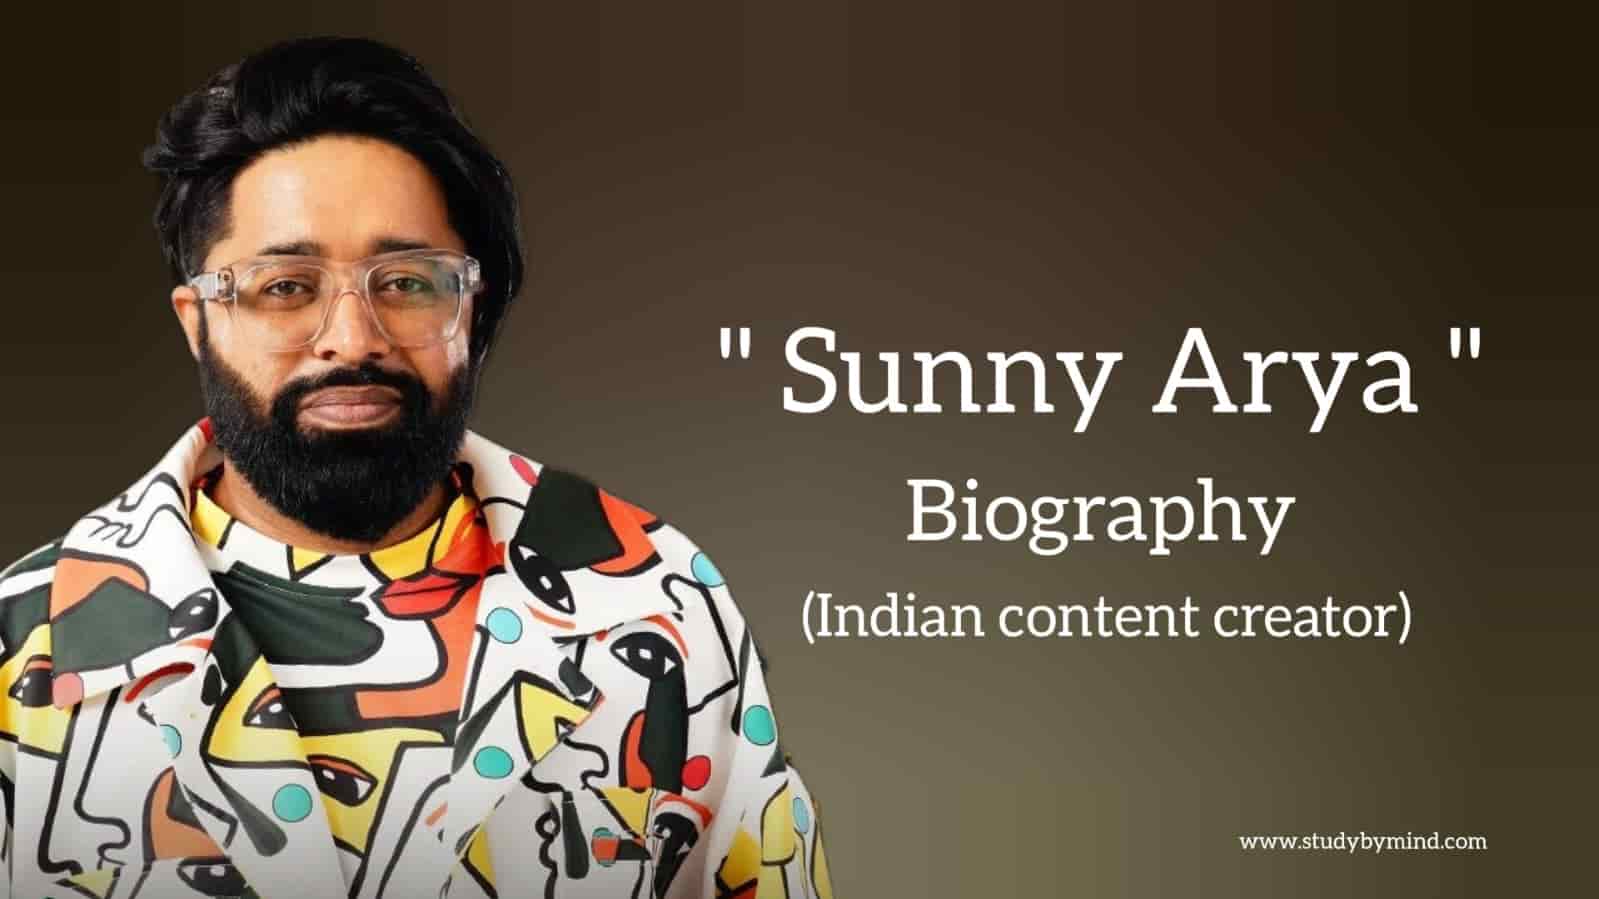 You are currently viewing Sunny arya biography in english (Content Creator)